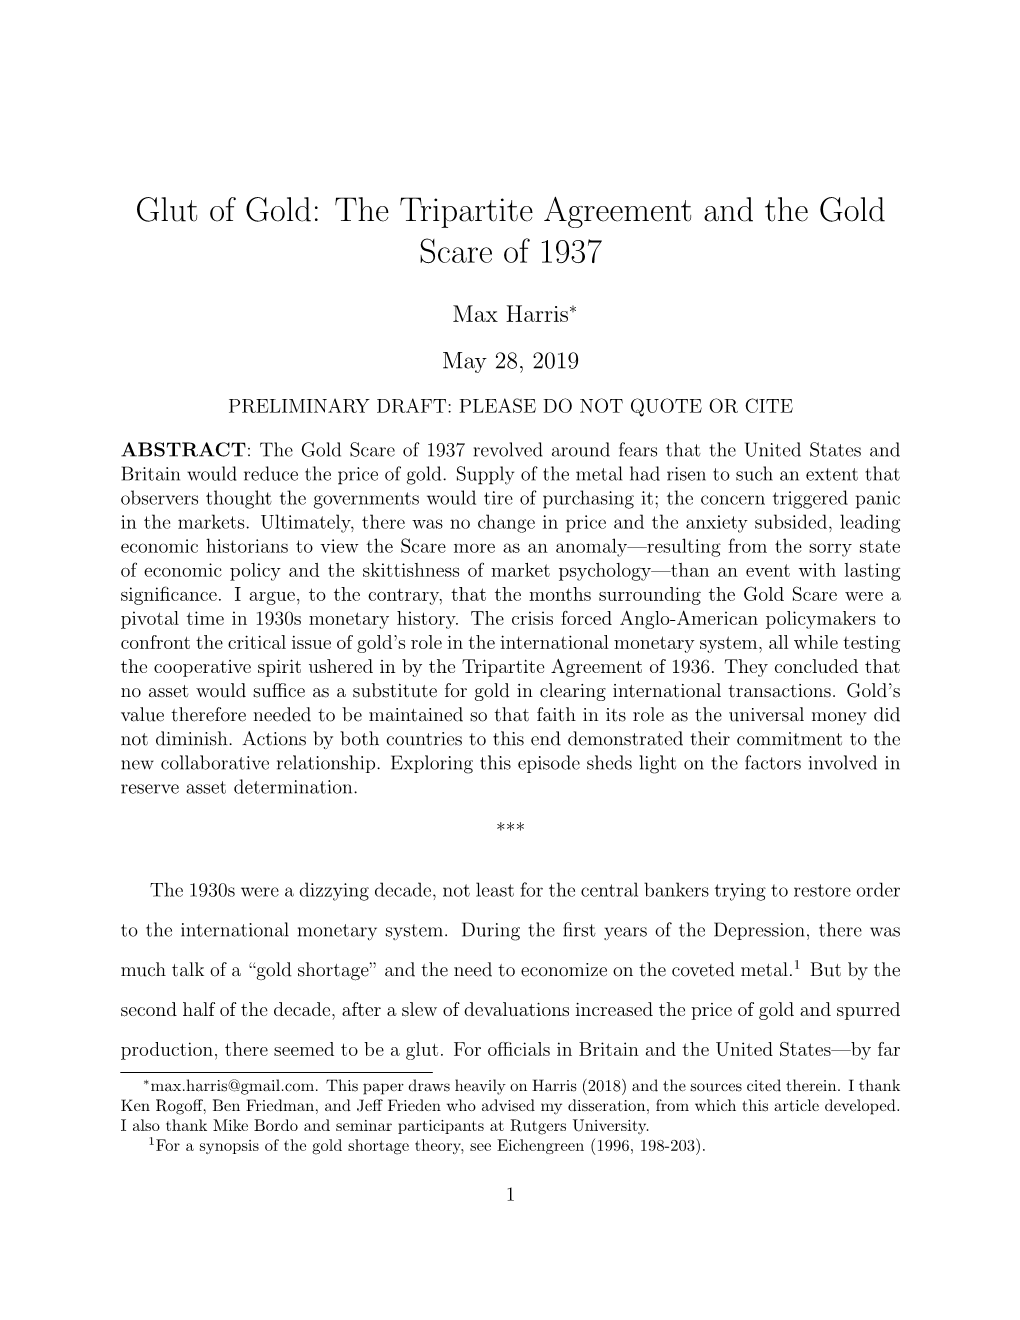 Glut of Gold: the Tripartite Agreement and the Gold Scare of 1937